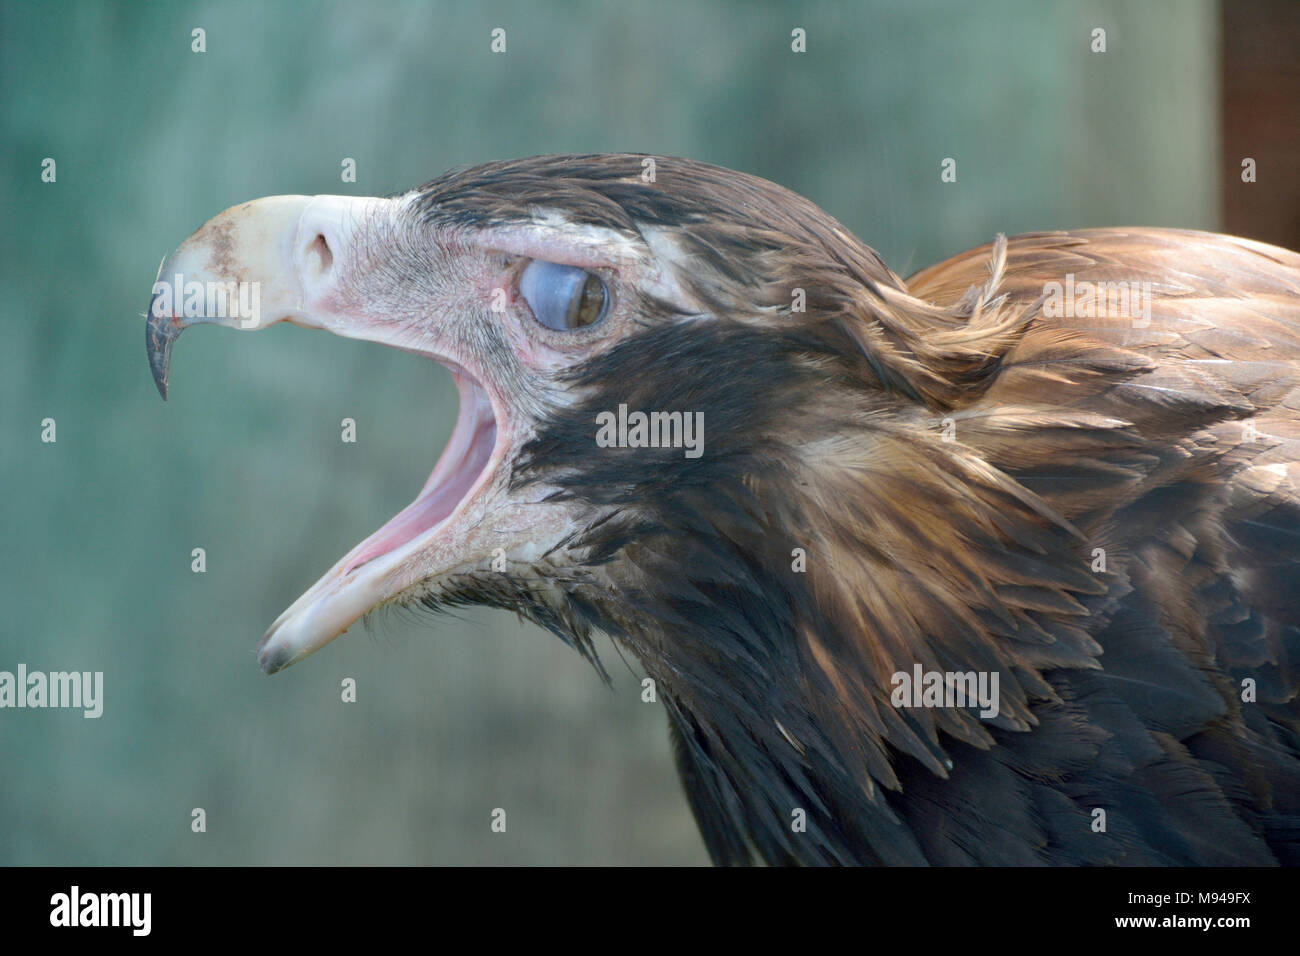 Wedge-tailed Eagle (Aquila audax) is the largest bird of prey in Australia, beak open. Stock Photo